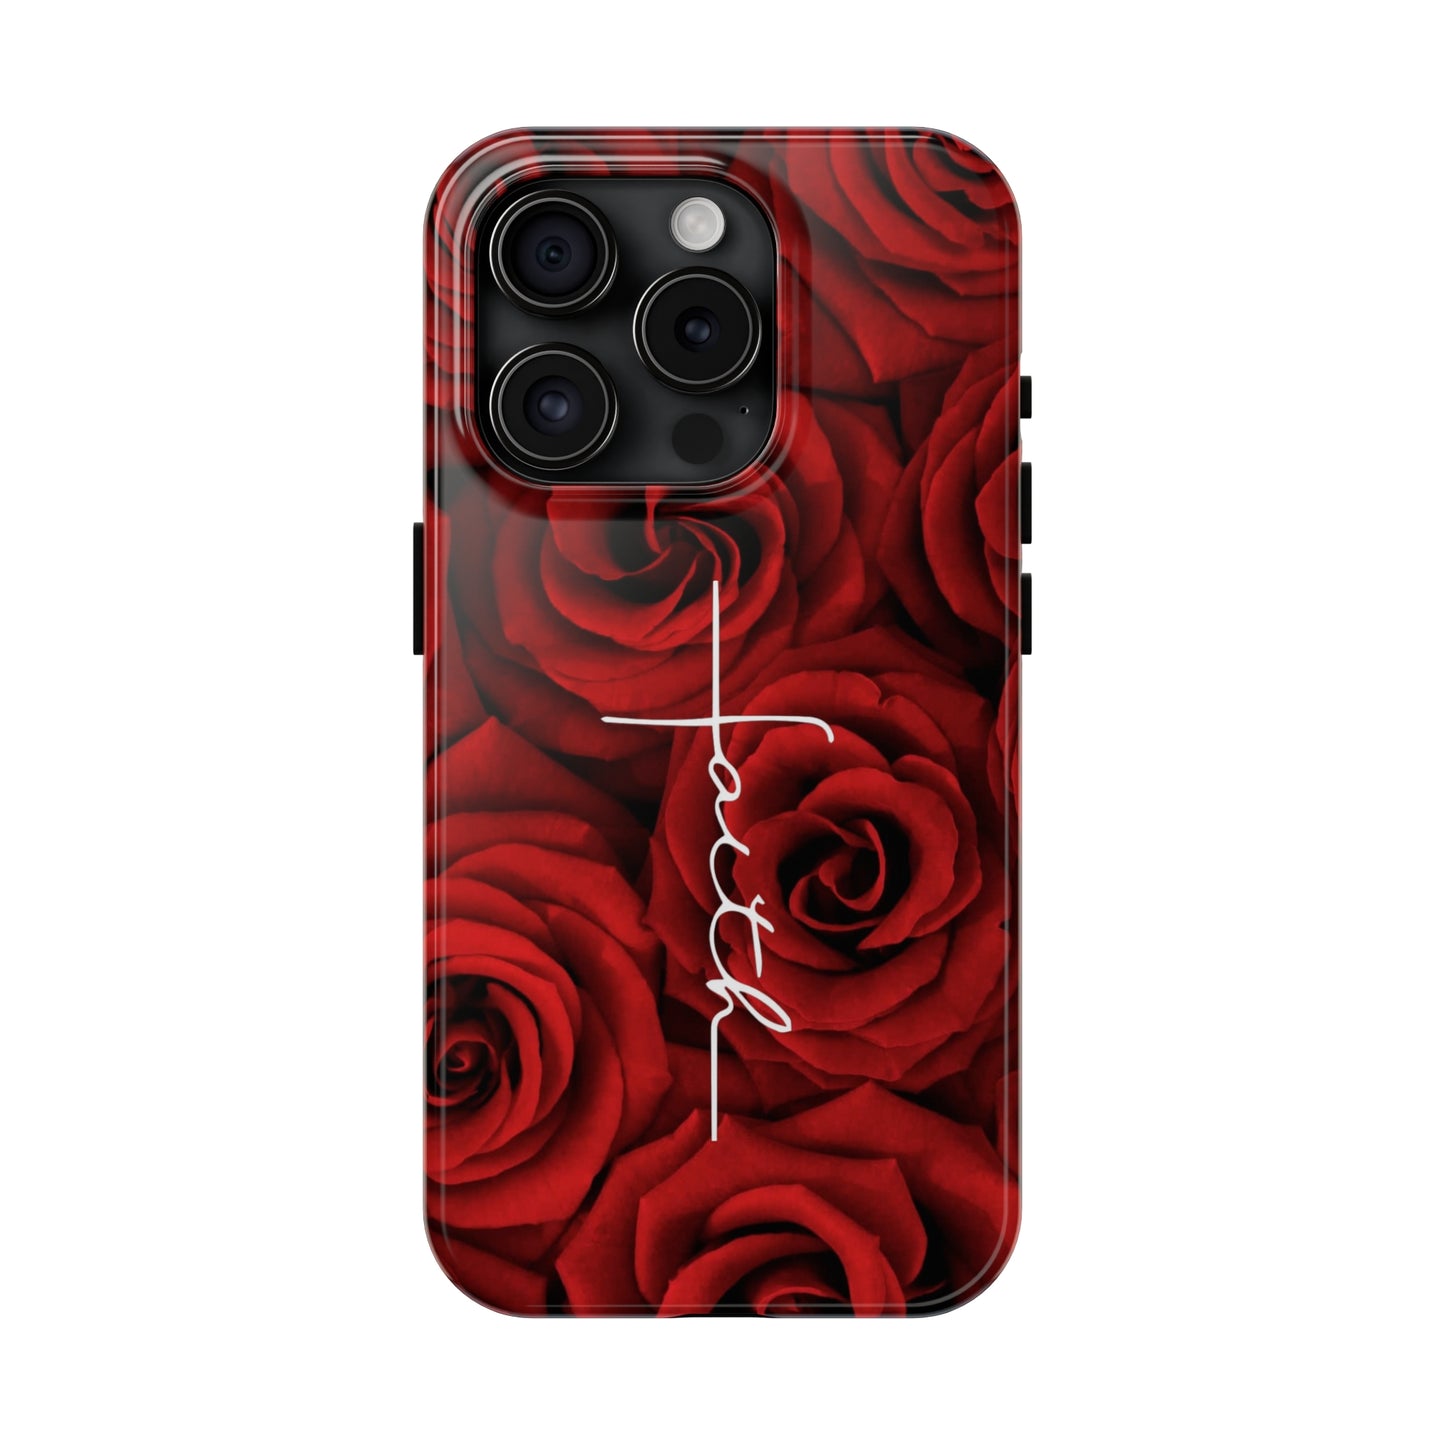 "Roses and faith" iPhone Case